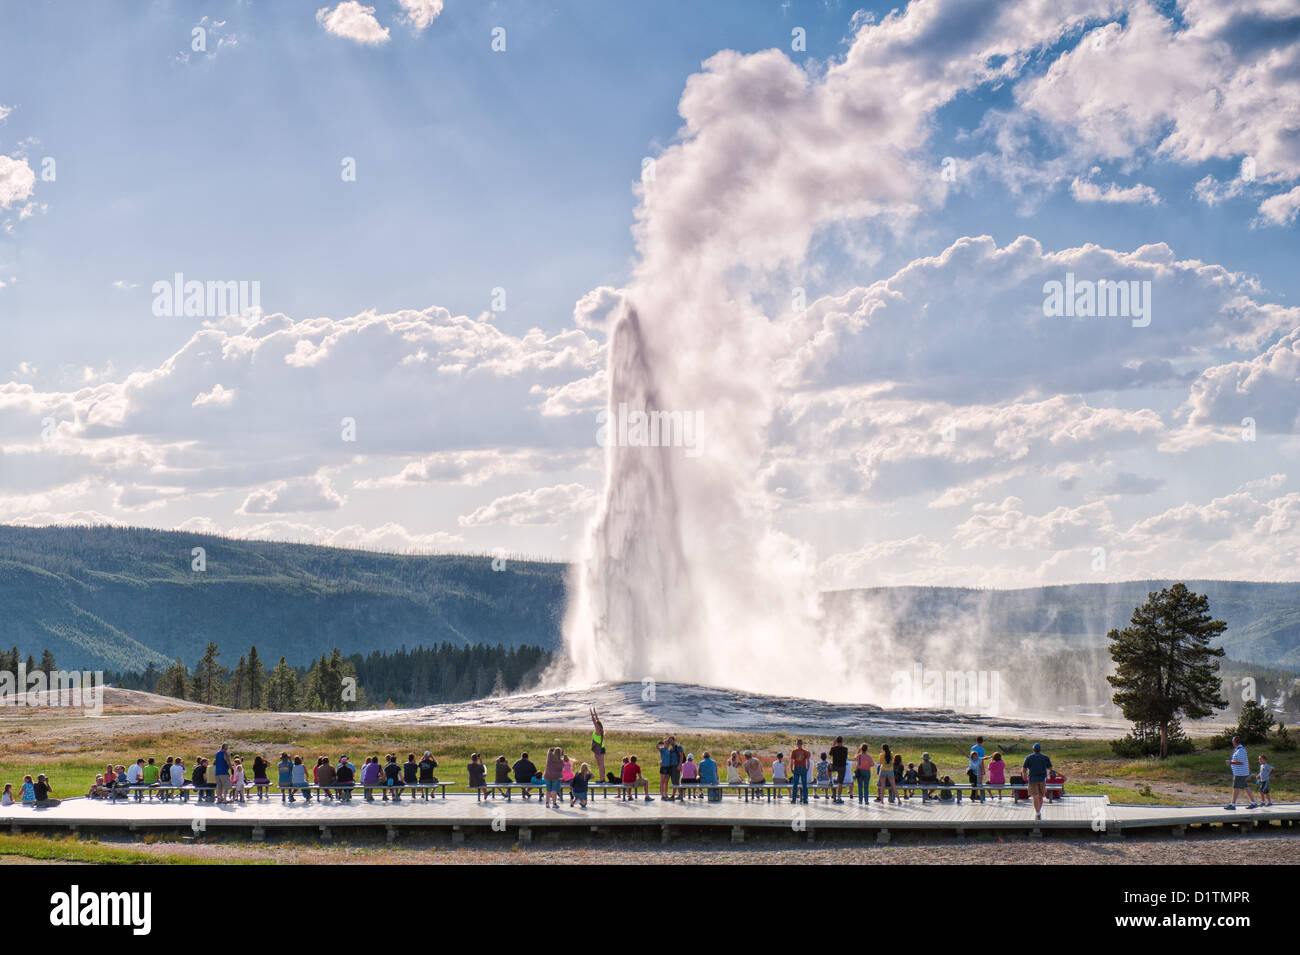 A crowd watches the Old Faithful geyser erupt during a summer visit to Yellowstone National Park Stock Photo